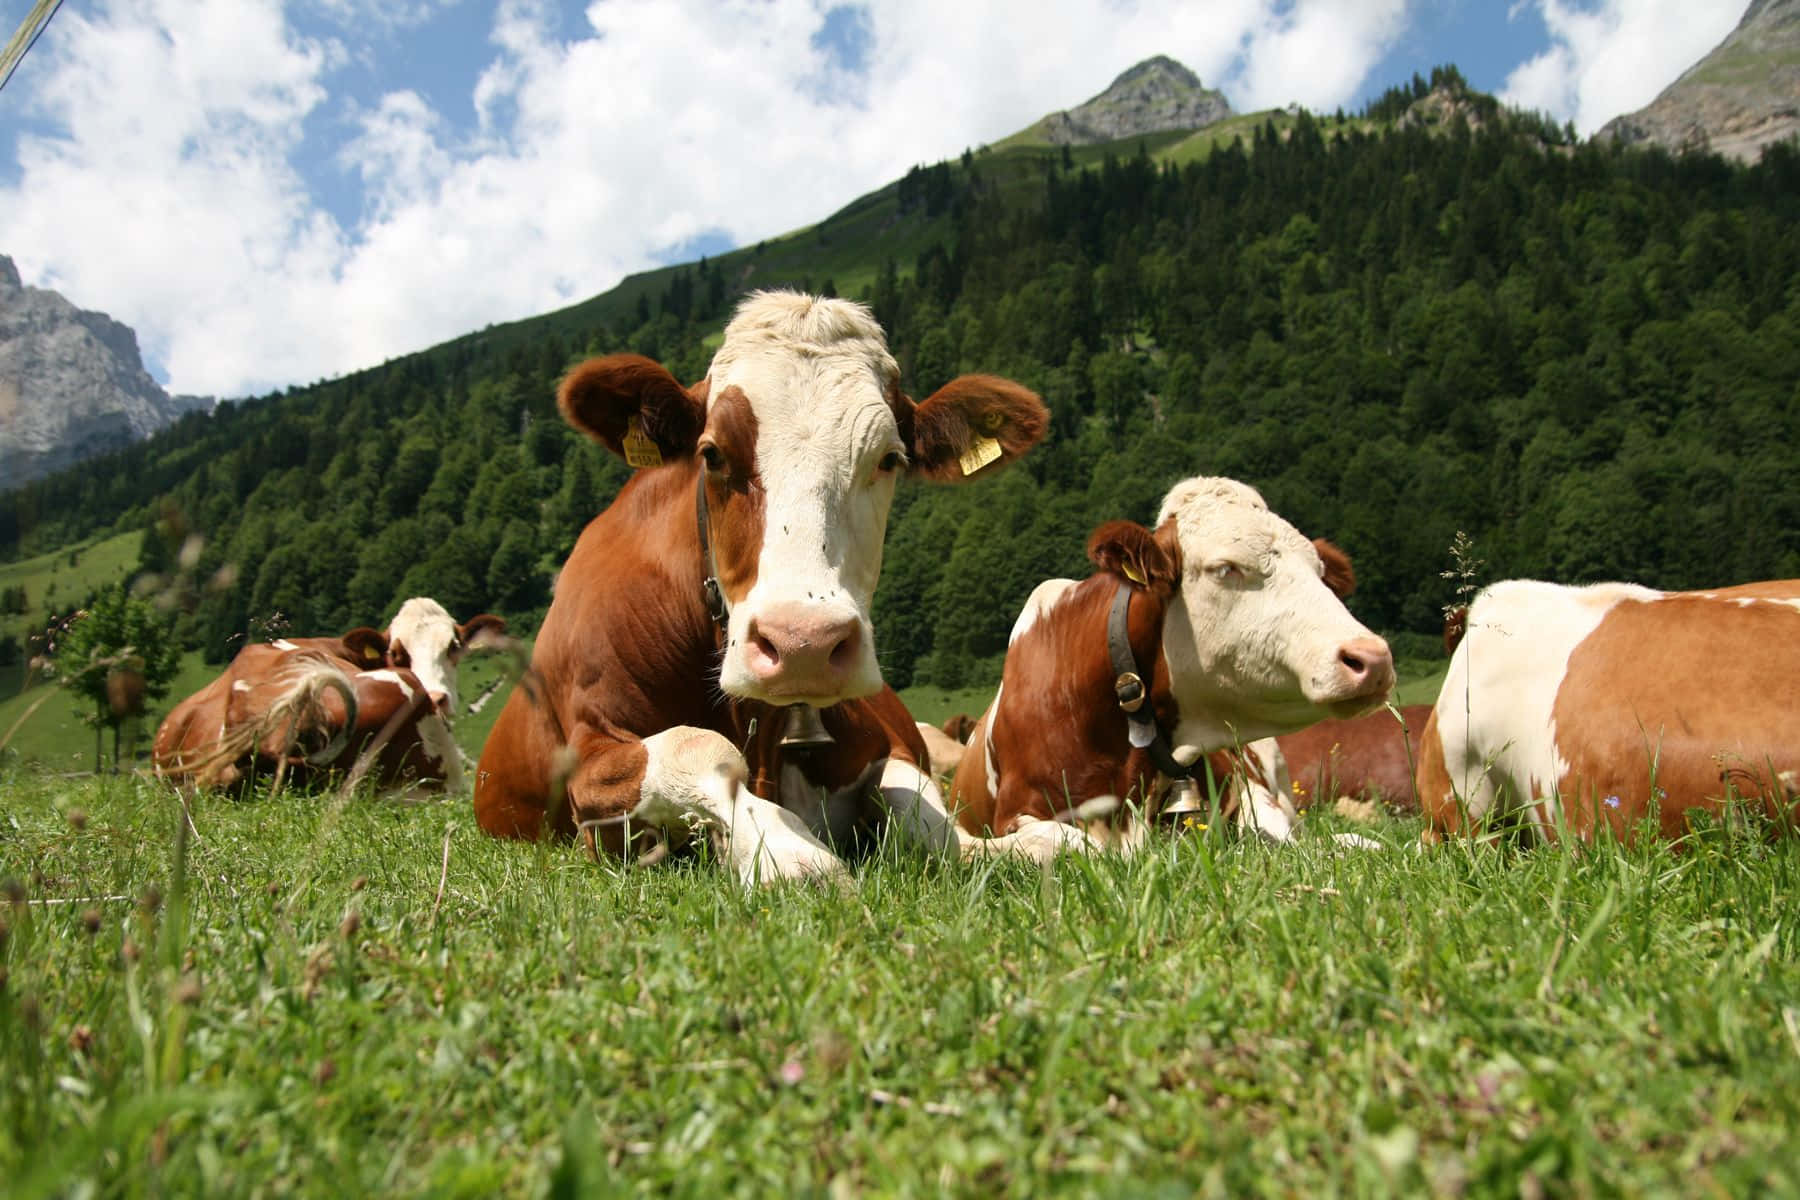 A group of adorable farm animals grazing in a lush green field by a barn